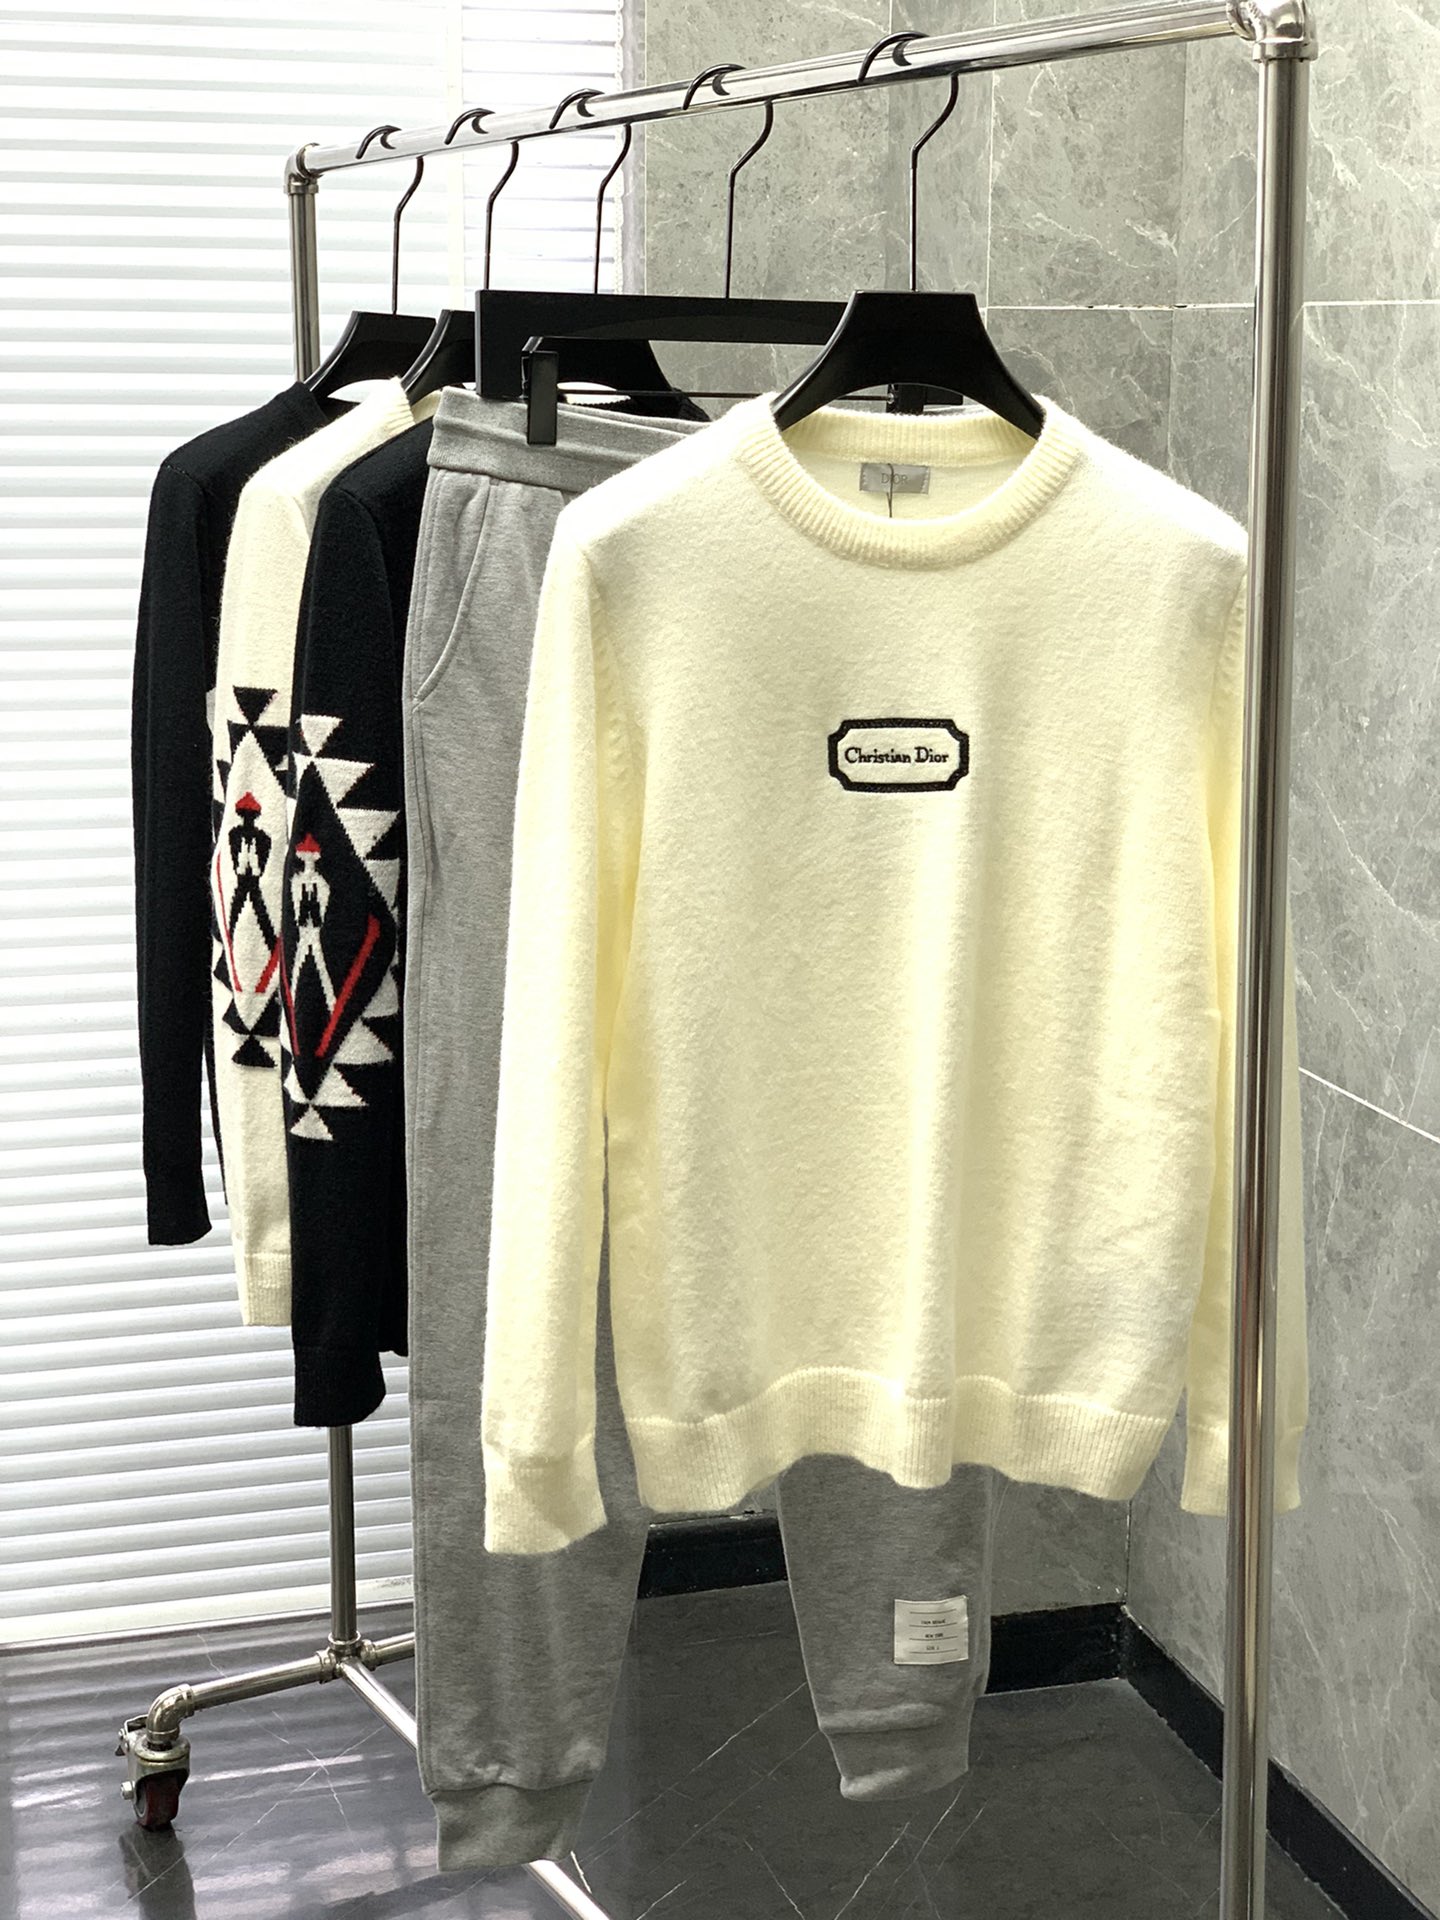 Dior Clothing Knit Sweater Sweatshirts Embroidery Knitting Wool Fall/Winter Collection Fashion